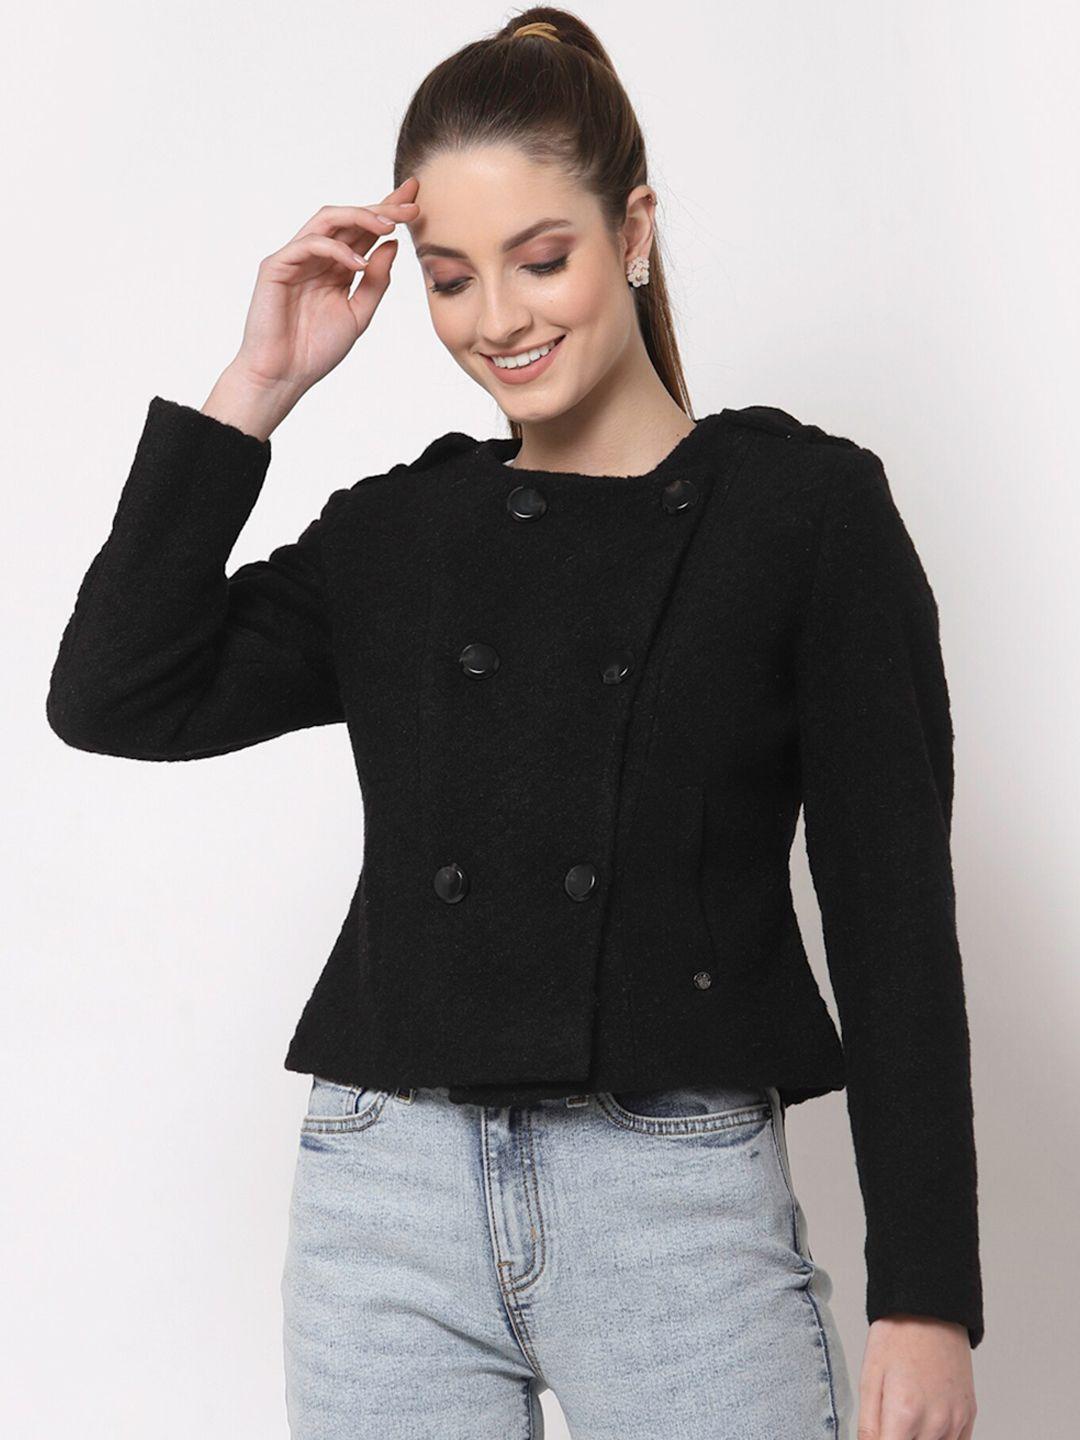 juelle women double breasted pea coat